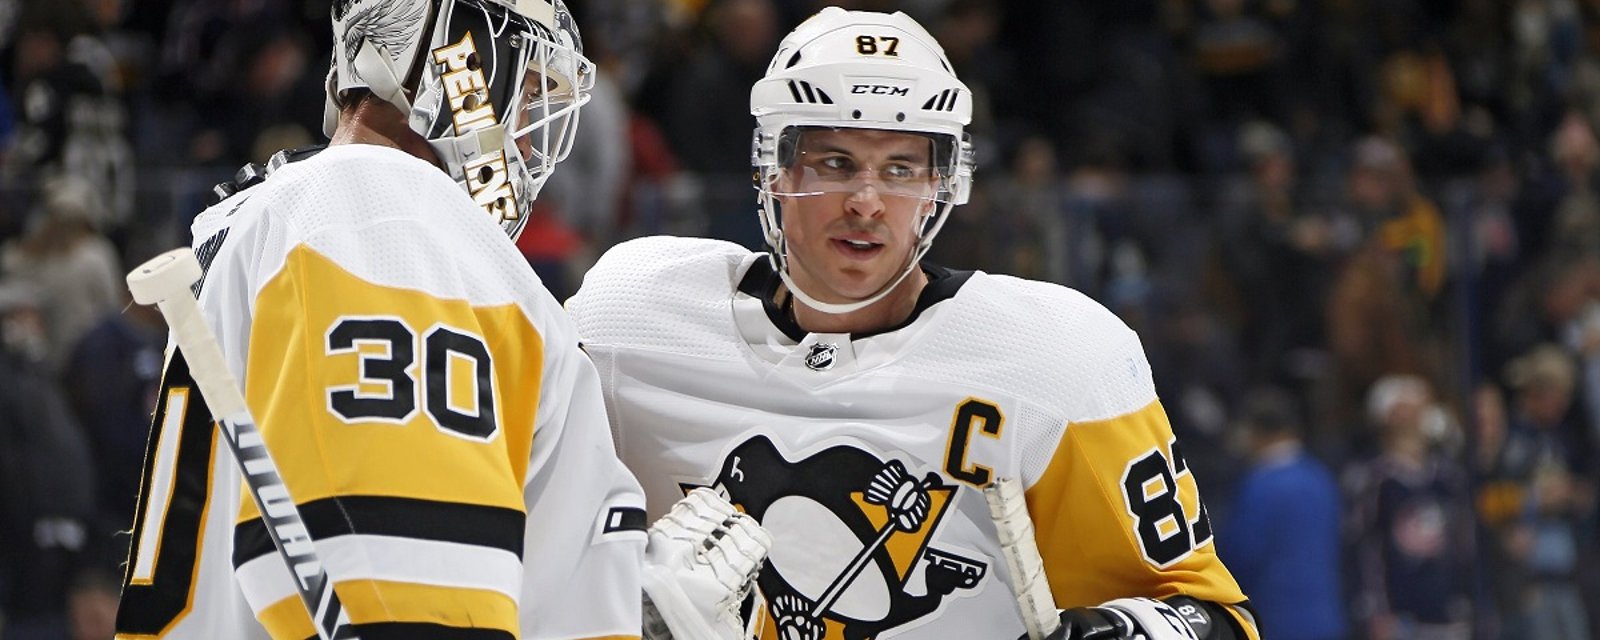 Burke: The window for the Penguins has closed.